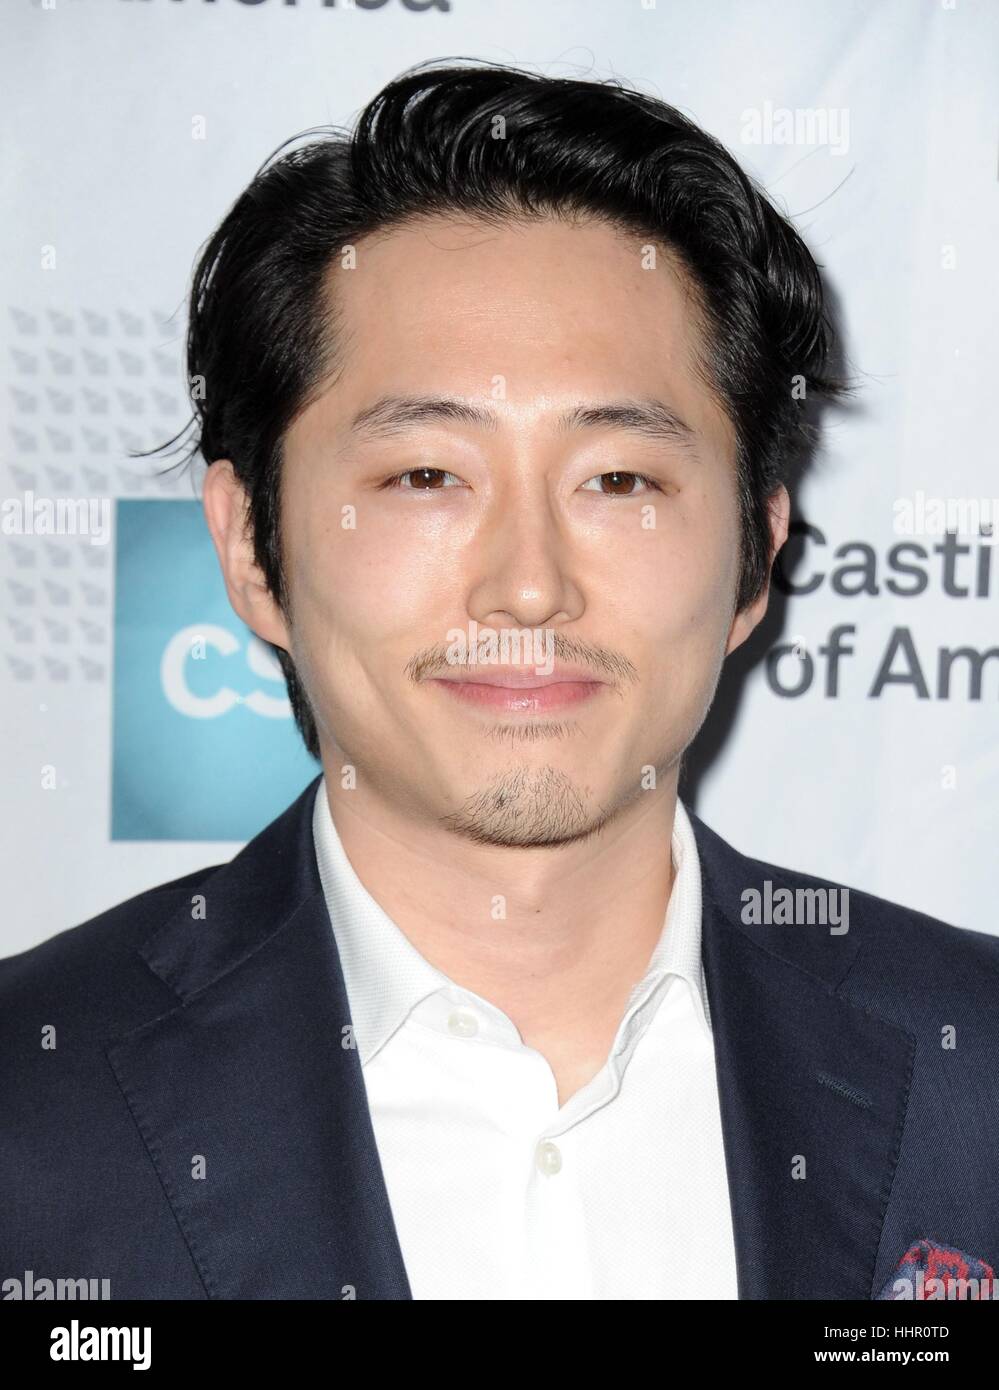 Beverly Hills, USA. 19th Jan, 2017. Steven Yeun at arrivals for 2017 Artios Awards, The Beverly Hilton Hotel, Beverly Hills. Credit: Dee Cercone/Everett Collection/Alamy Live News Stock Photo